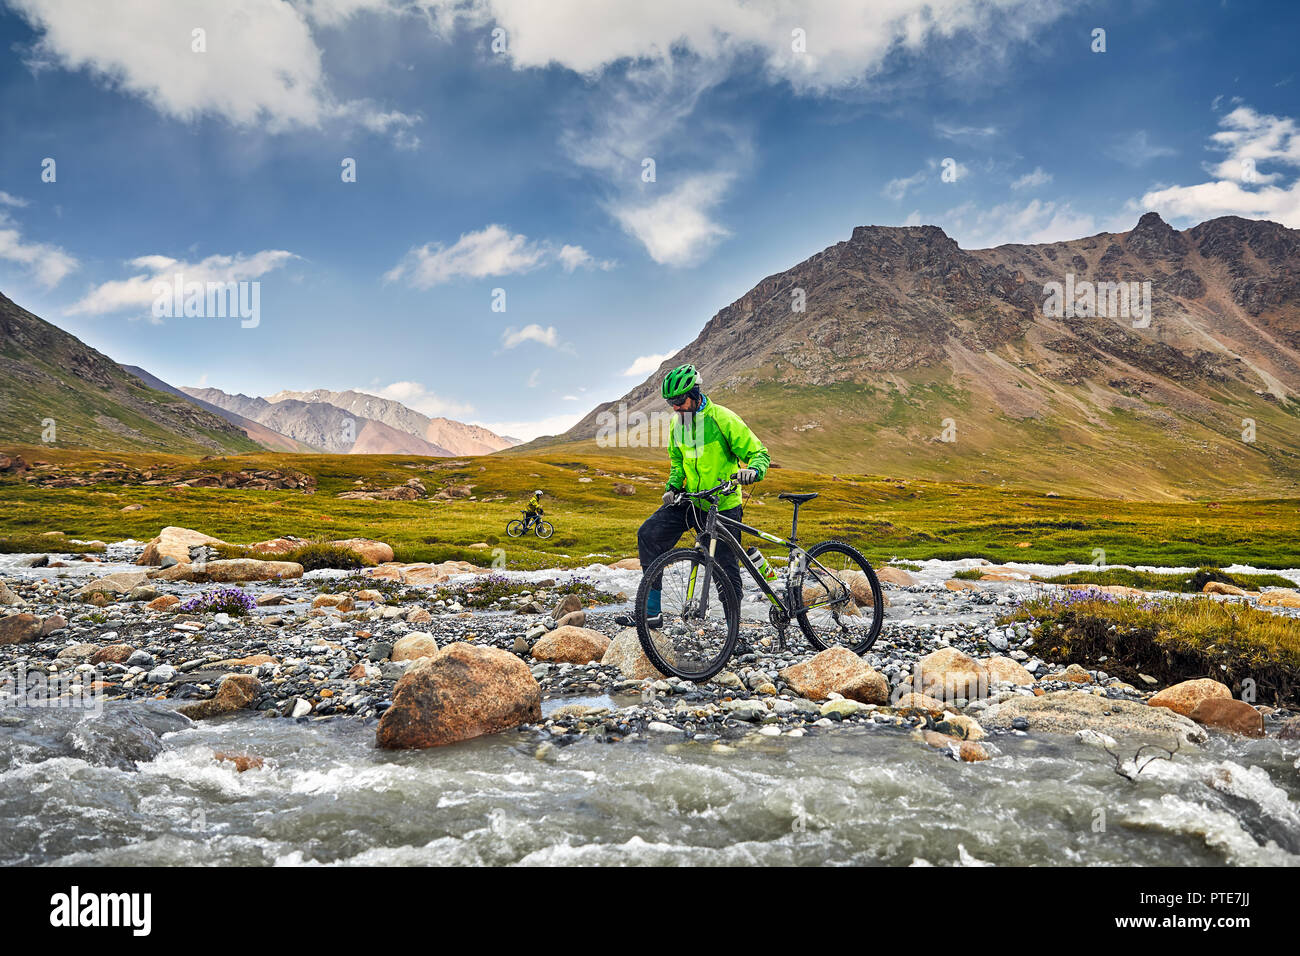 Man with mountain bike crossing the river in the wild mountains against cloudy sky background. Stock Photo